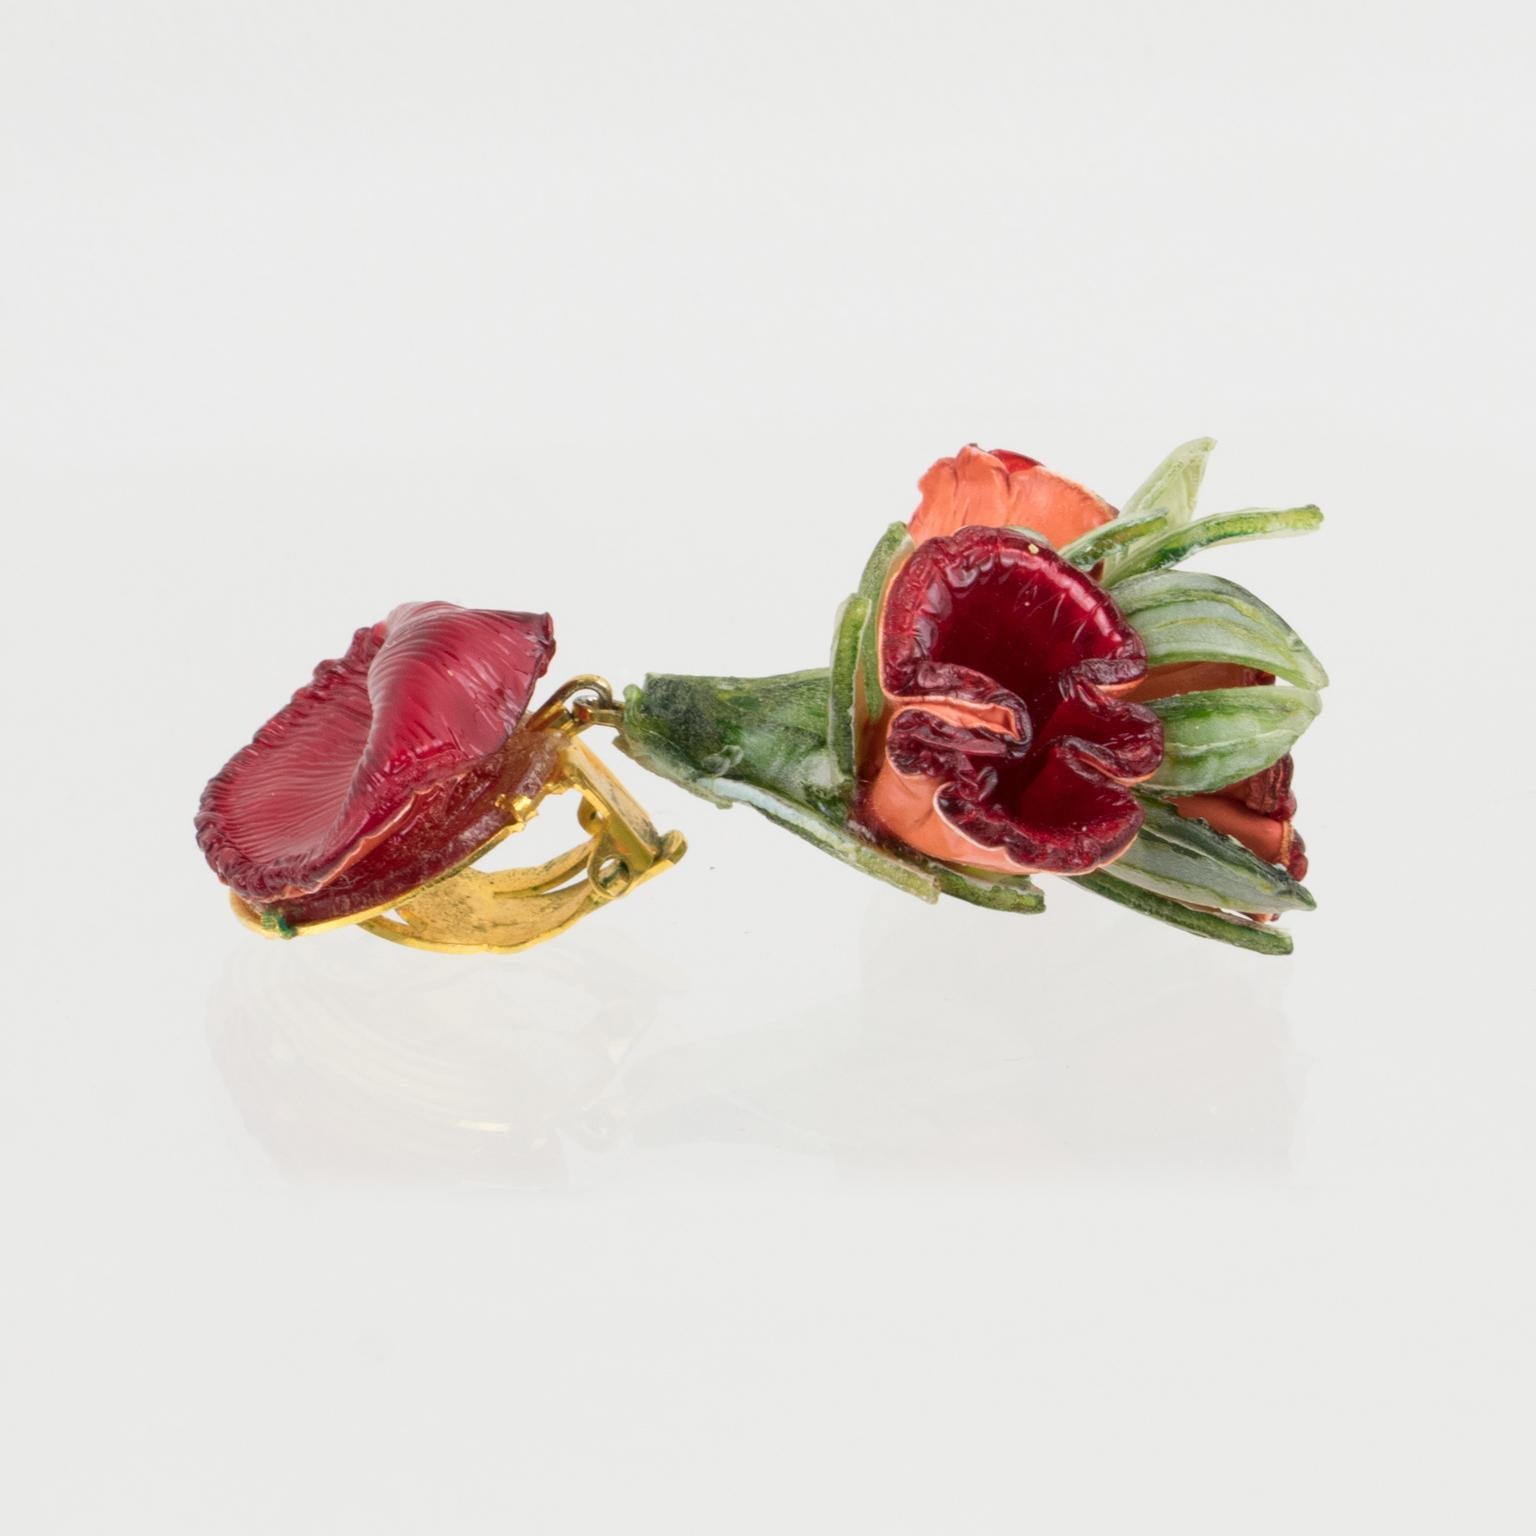 Women's Francoise Montague by Cilea Clip Earrings Red and Green Resin Flowers